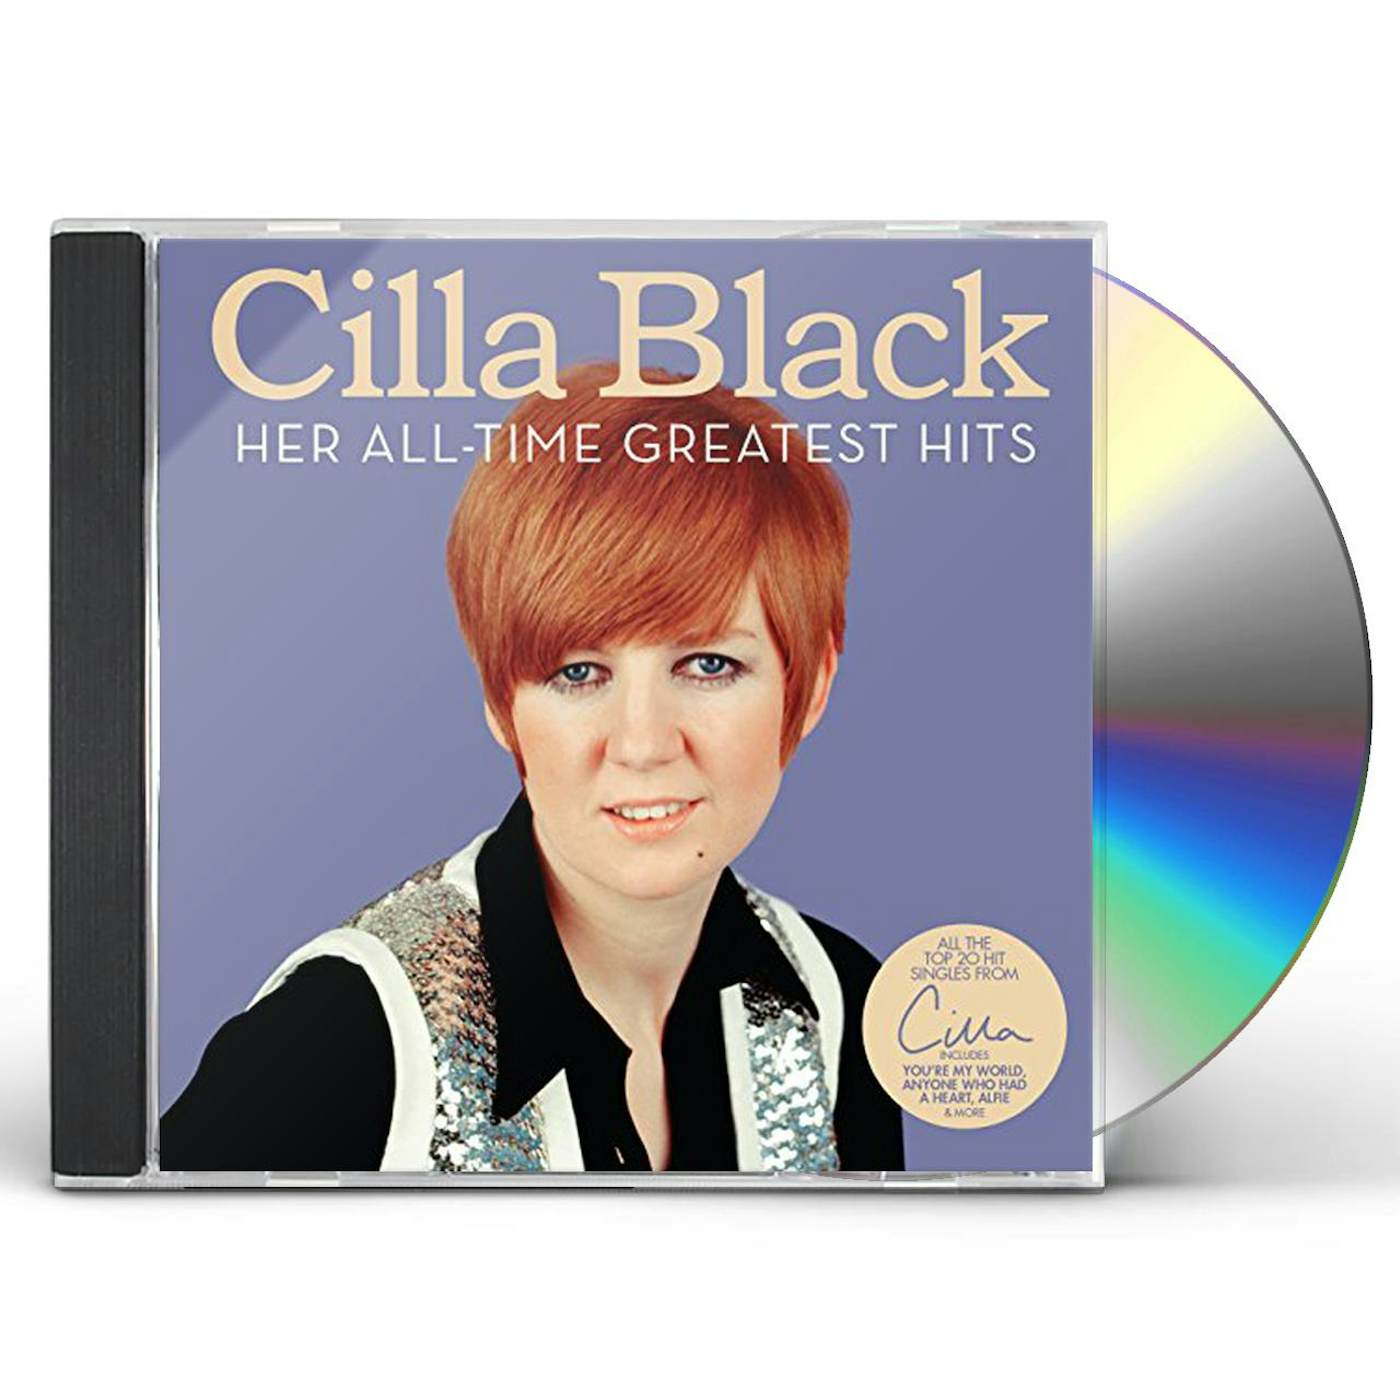 Cilla Black HER ALL-TIME GREATEST HITS CD